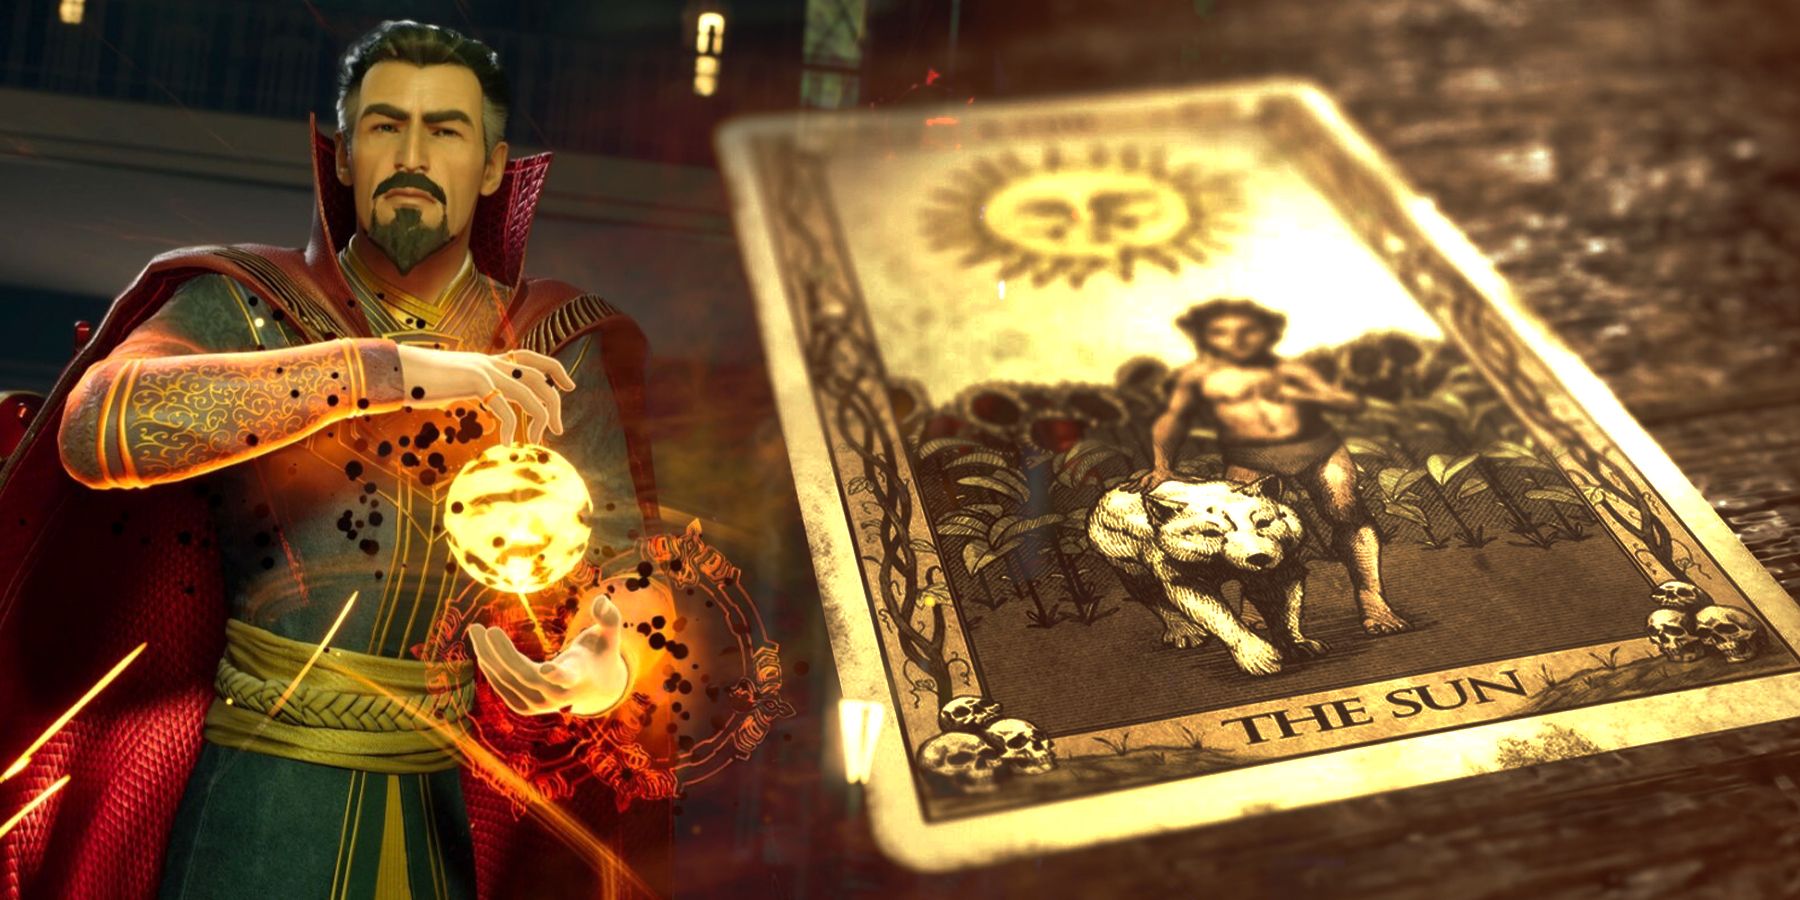 Doctor Strange from Marvel's Midnight Suns next to a tarot card